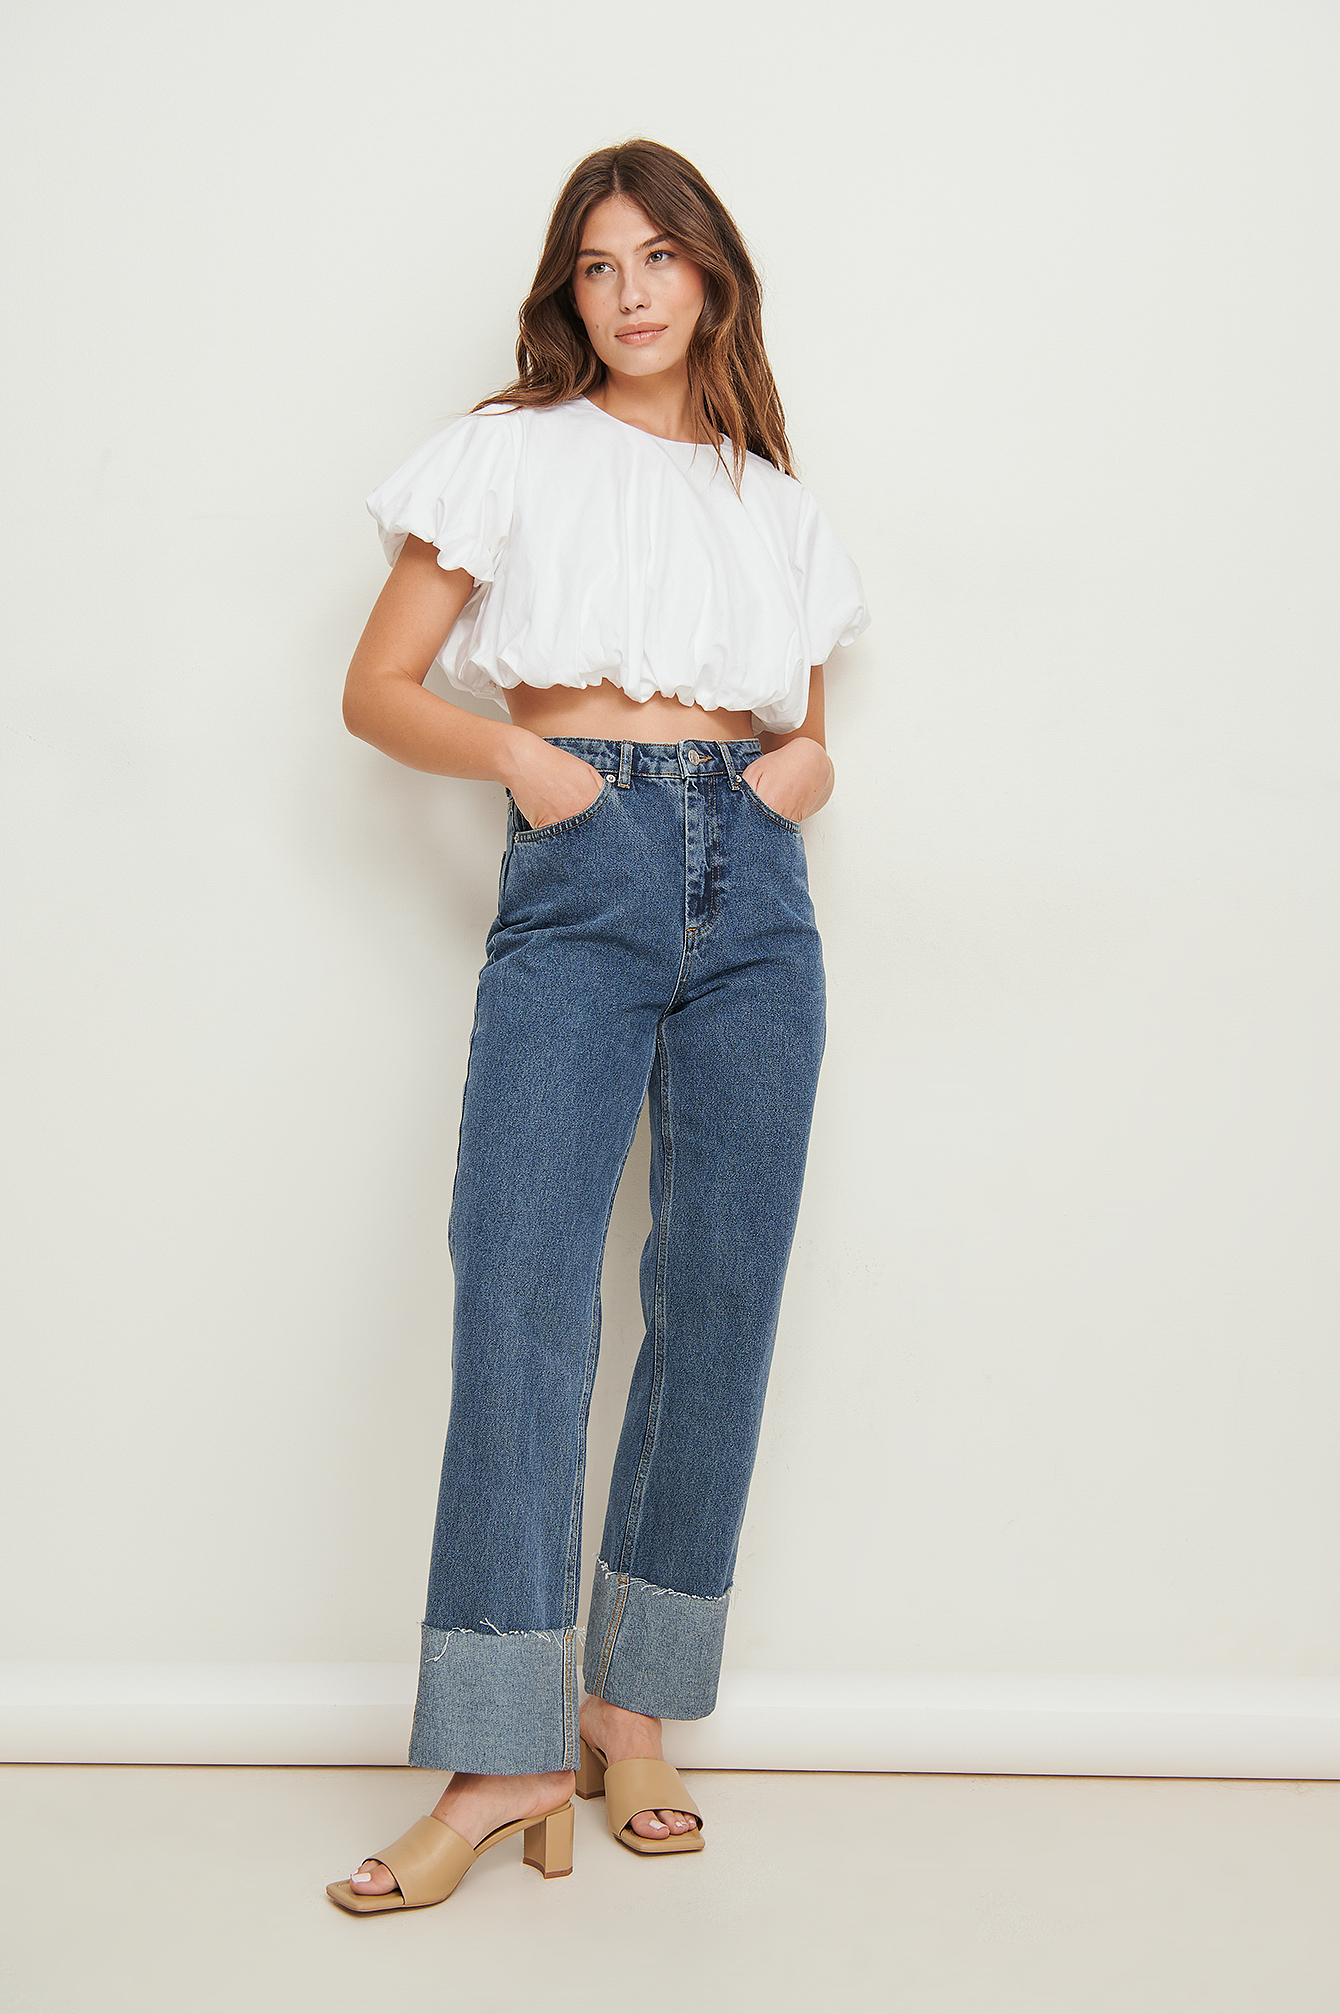 Puff Sleeve Cotton Top Outfit